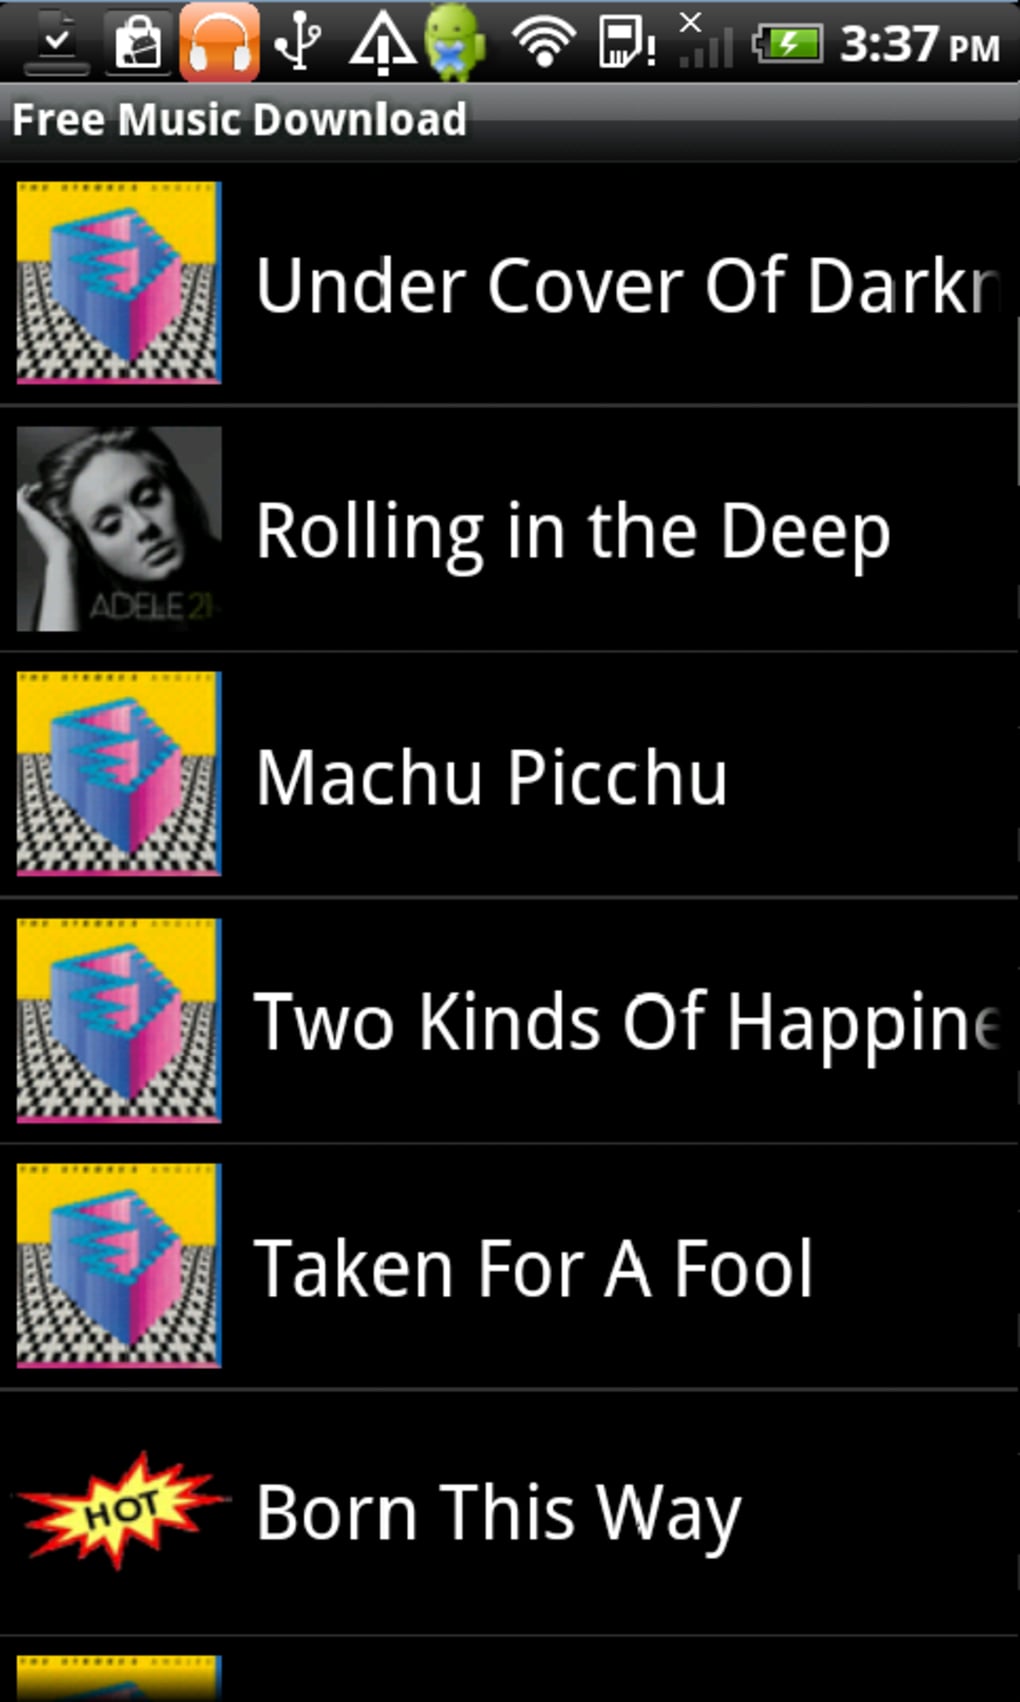 Download music for free online for android phone